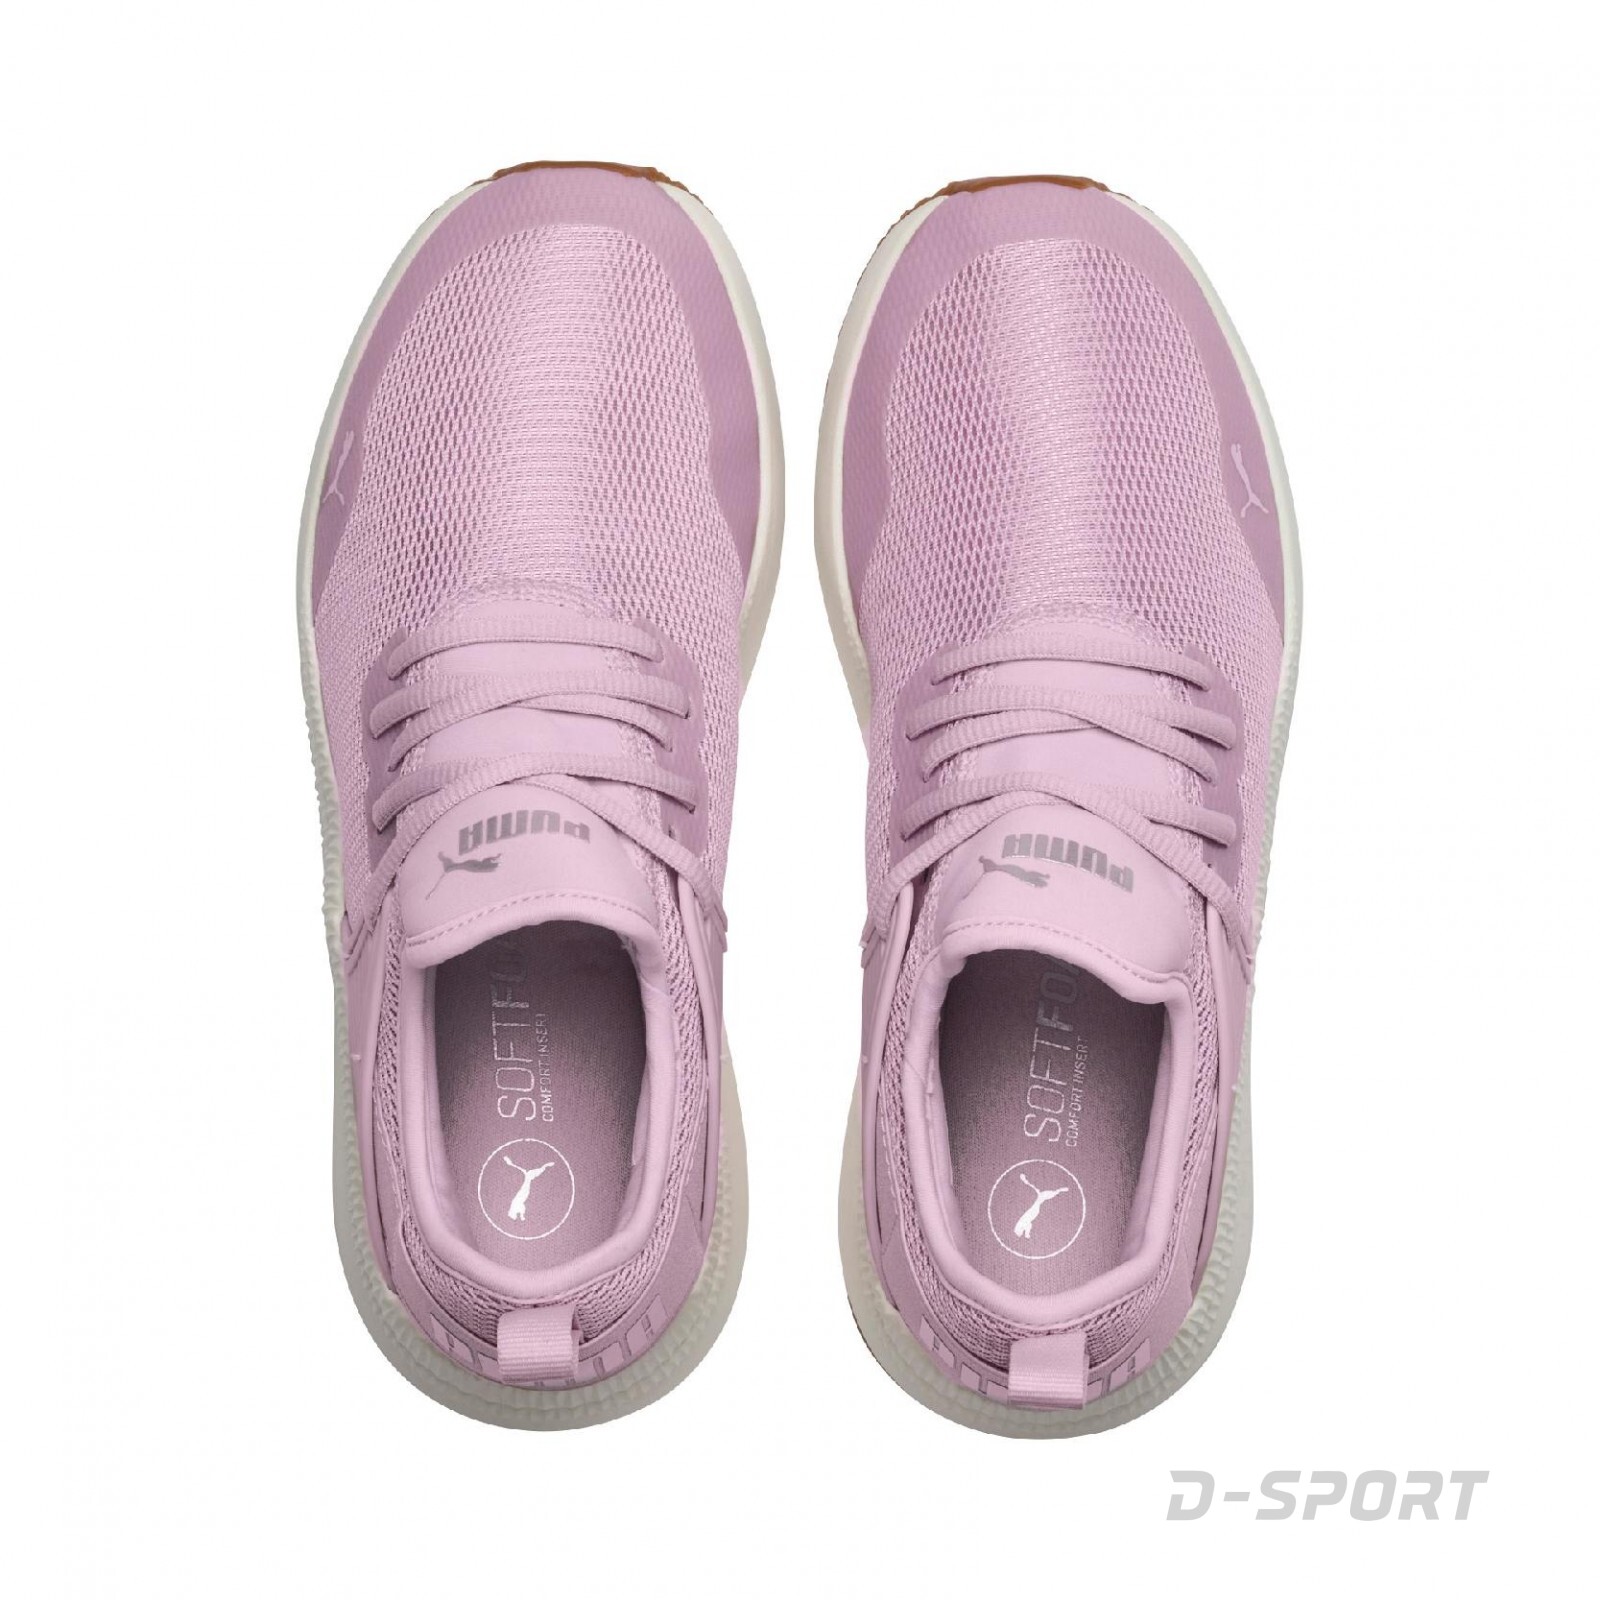 Puma Pacer Next Cage Winsome Orchid